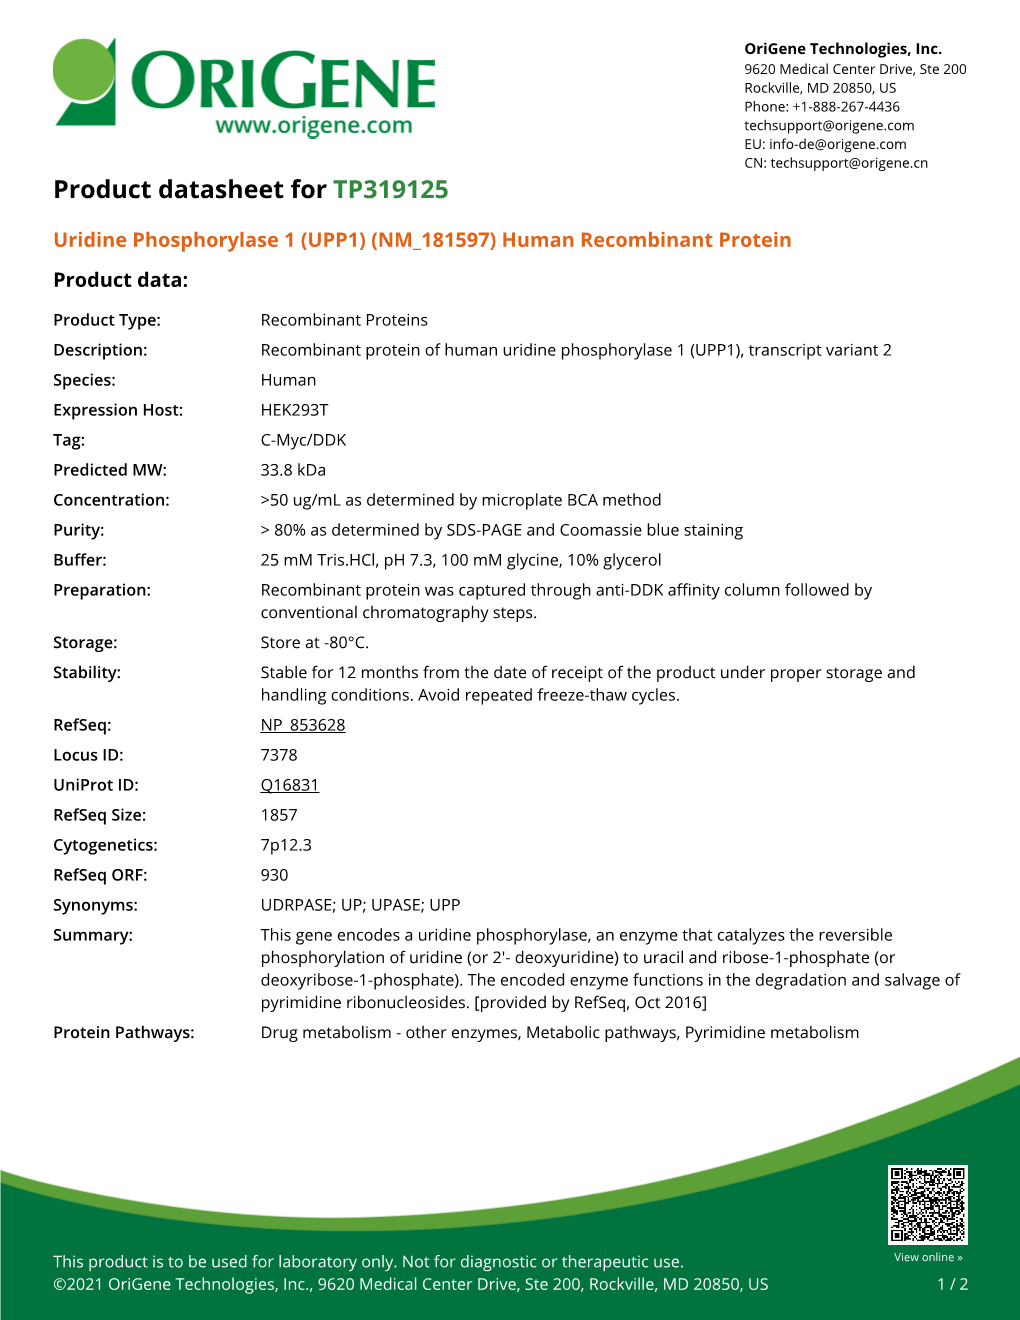 (UPP1) (NM 181597) Human Recombinant Protein Product Data